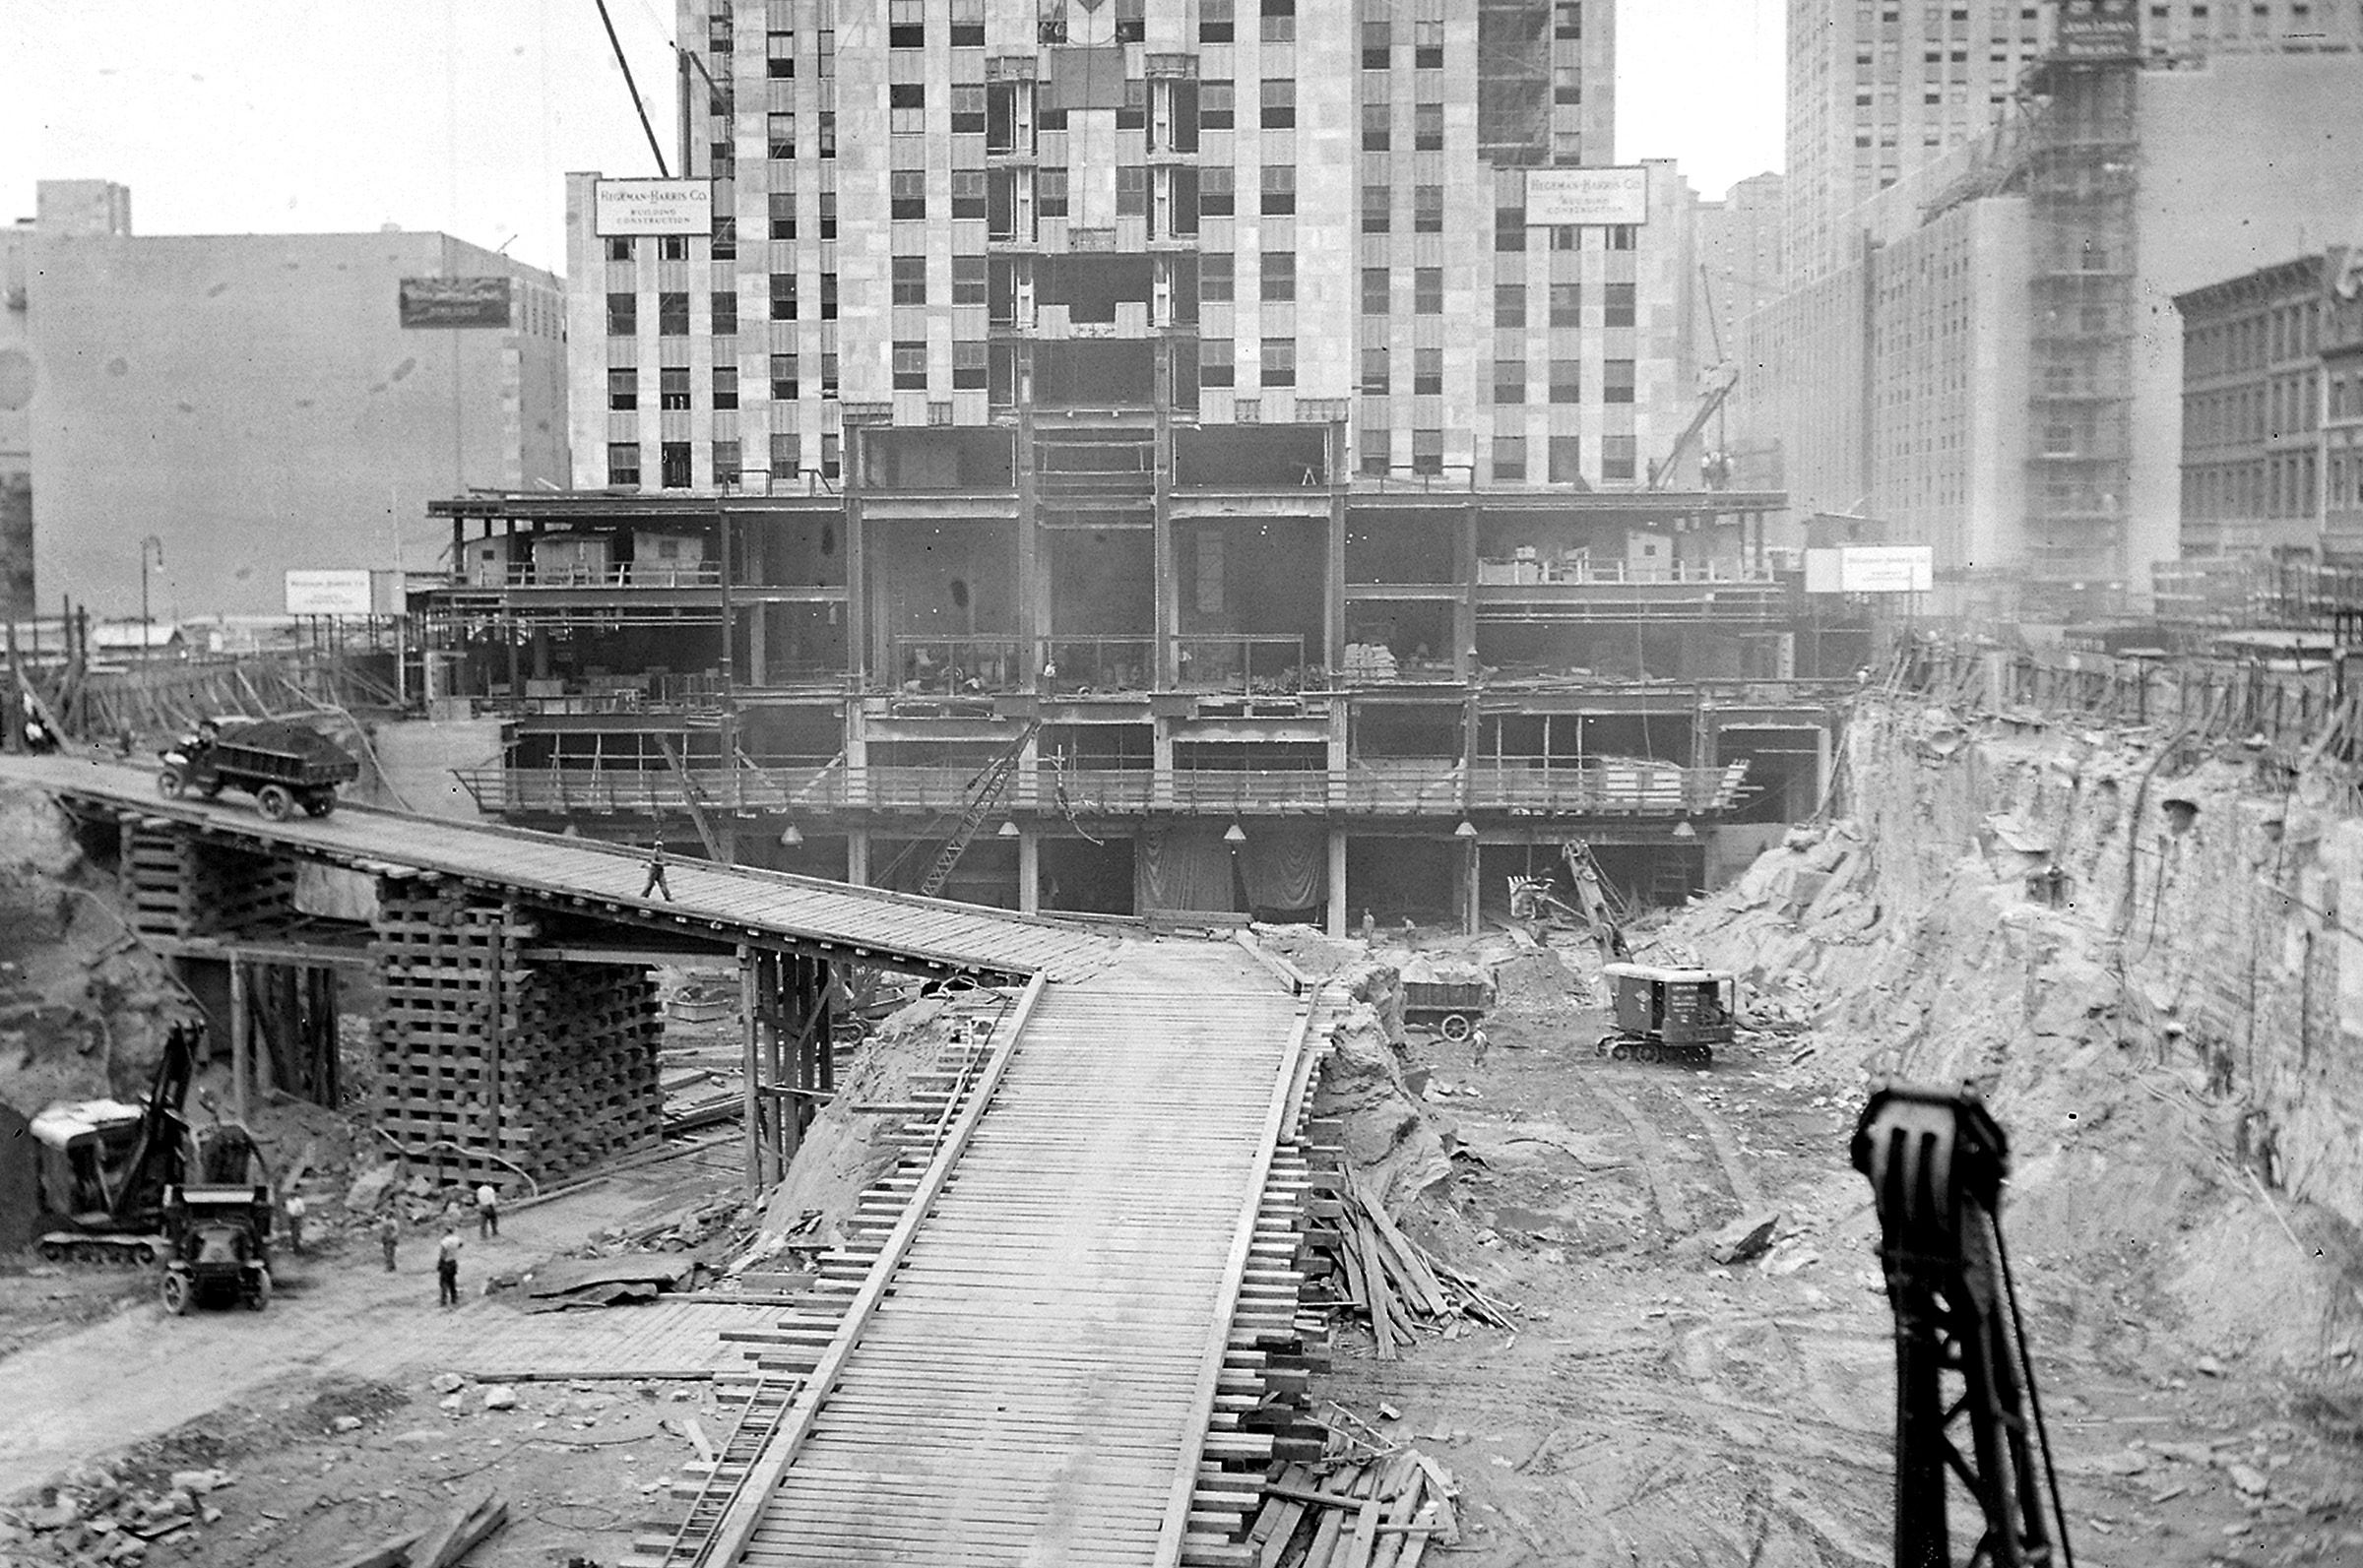 Excavation of site for Rockefeller Center construction on January 26, 1932. The site was formerly a botanic garden. (NY Daily News/Getty Images)